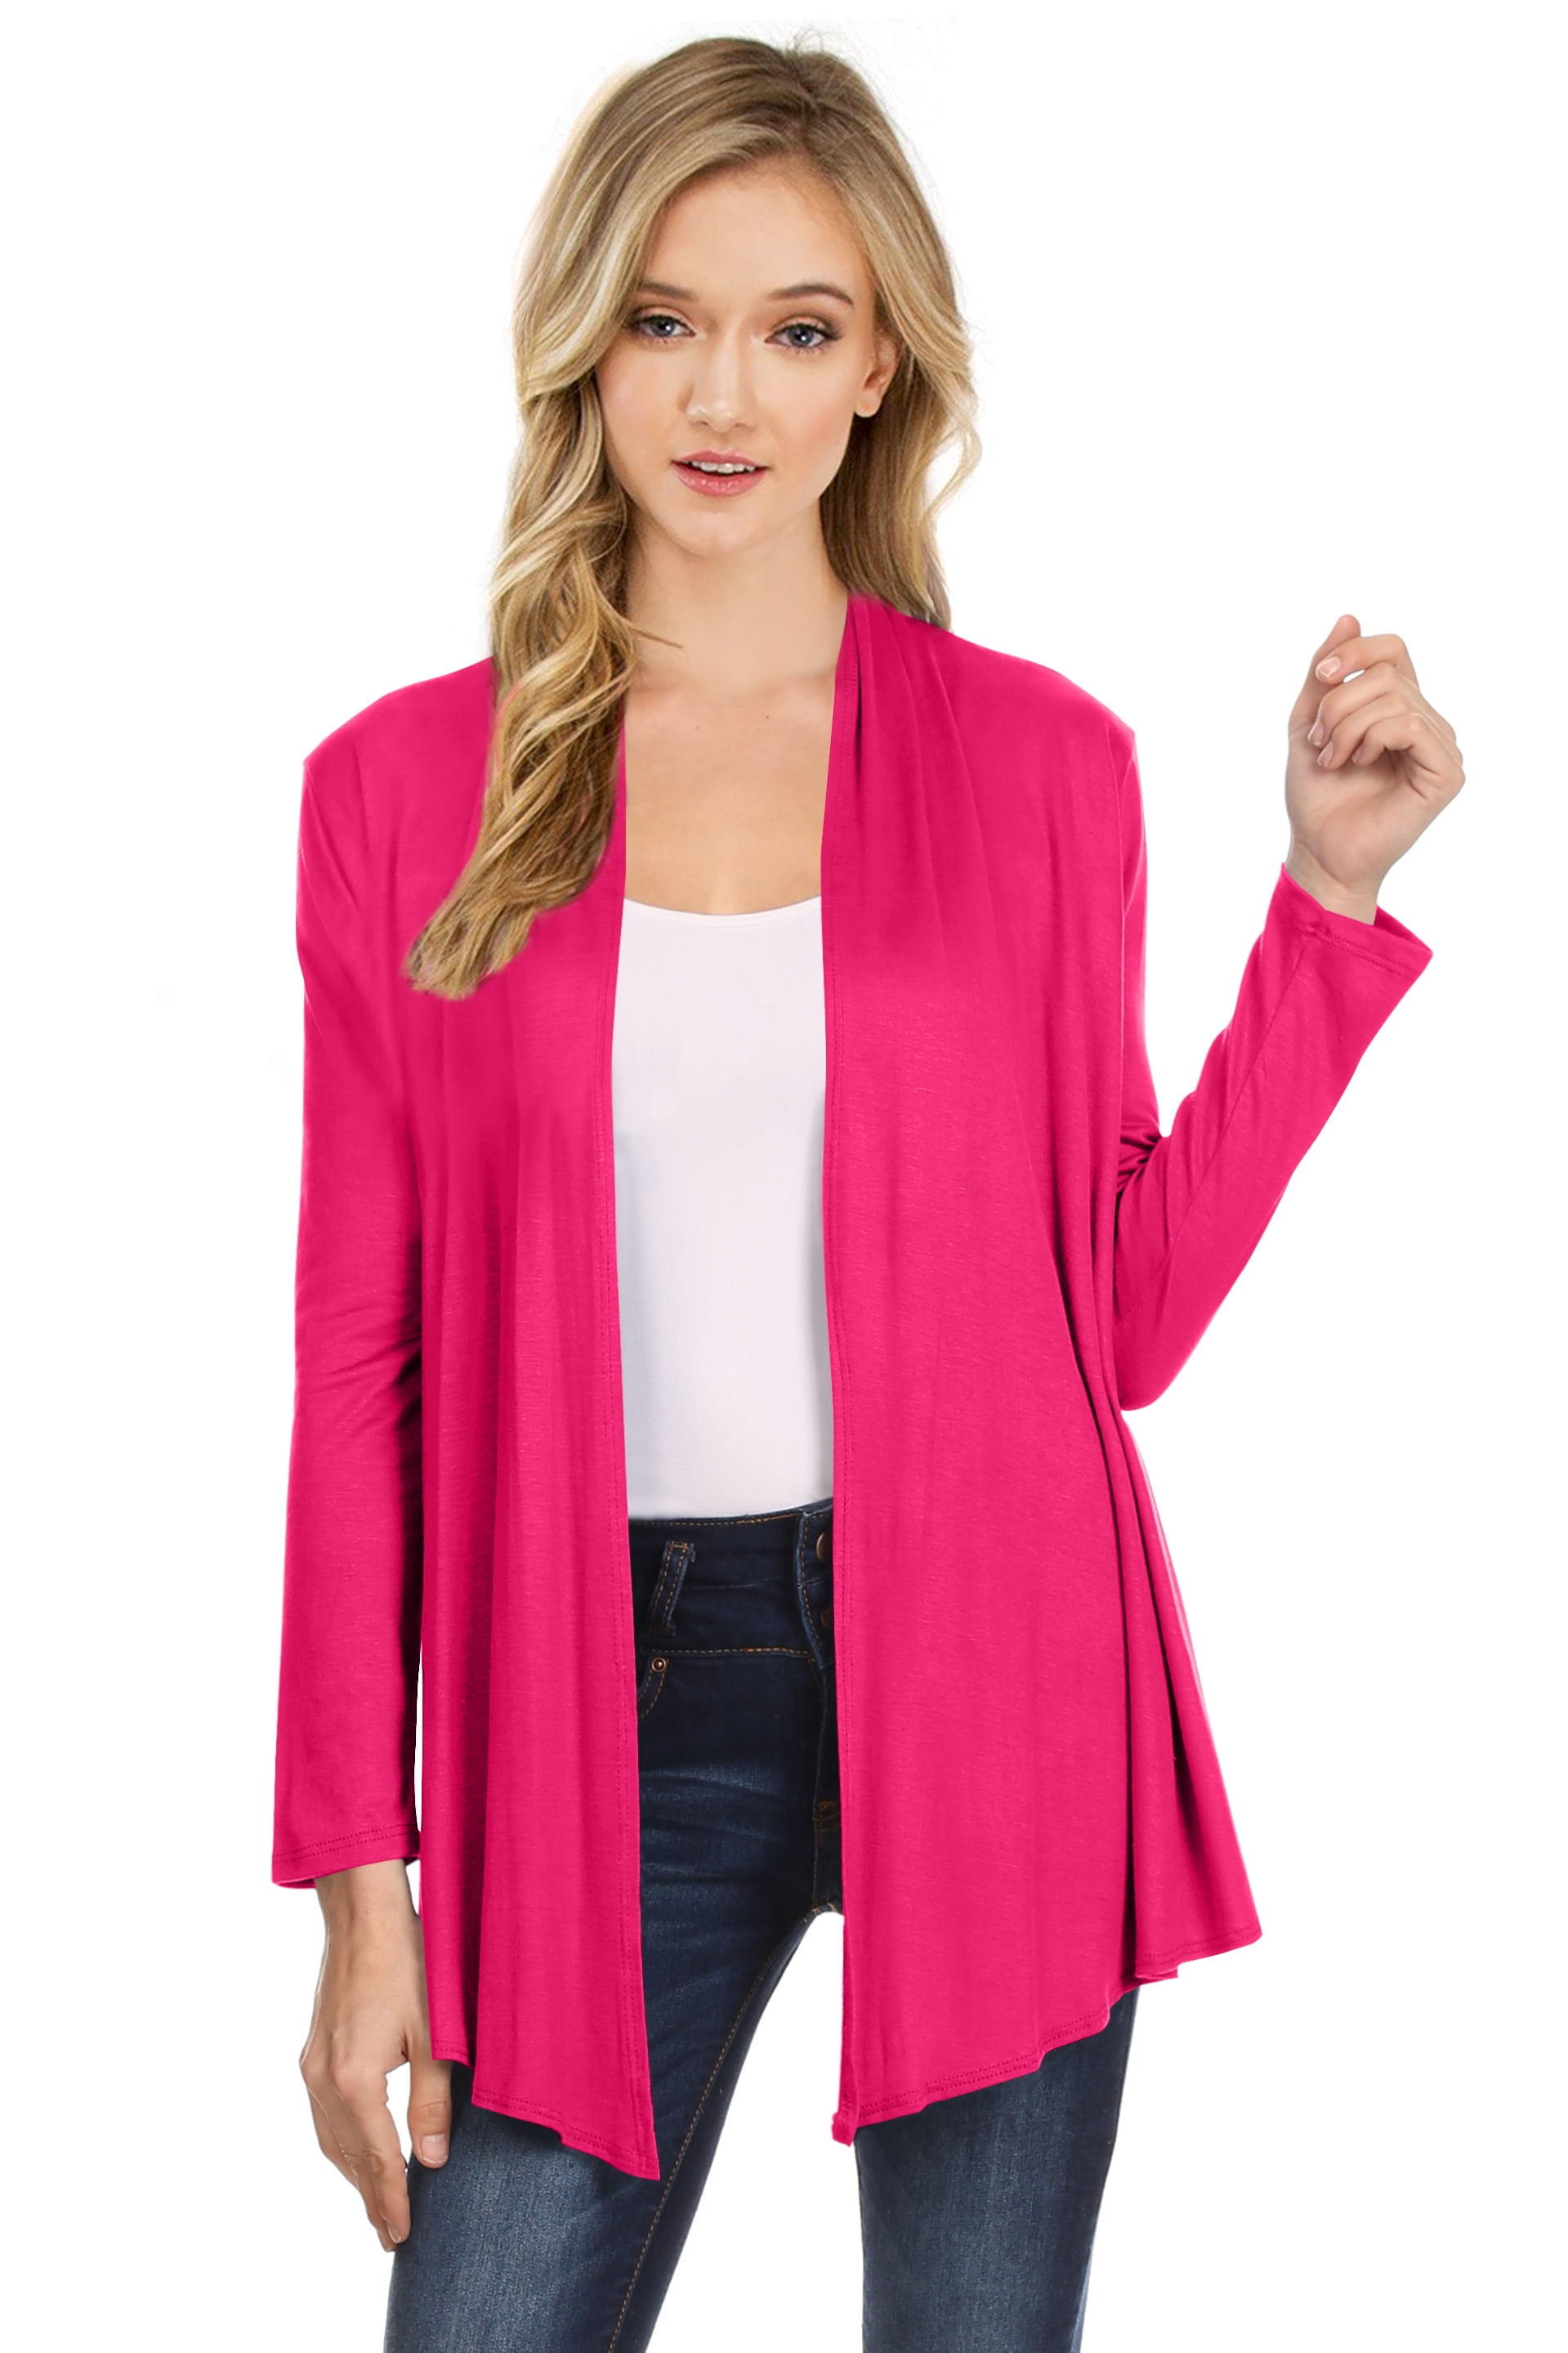 Women's Casual Lightweight Open Front Cardigan and Soft Basic Drape Long Sleeve Sweater Coat Made in USA Clothing Womens Clothing Jumpers Cardigans 